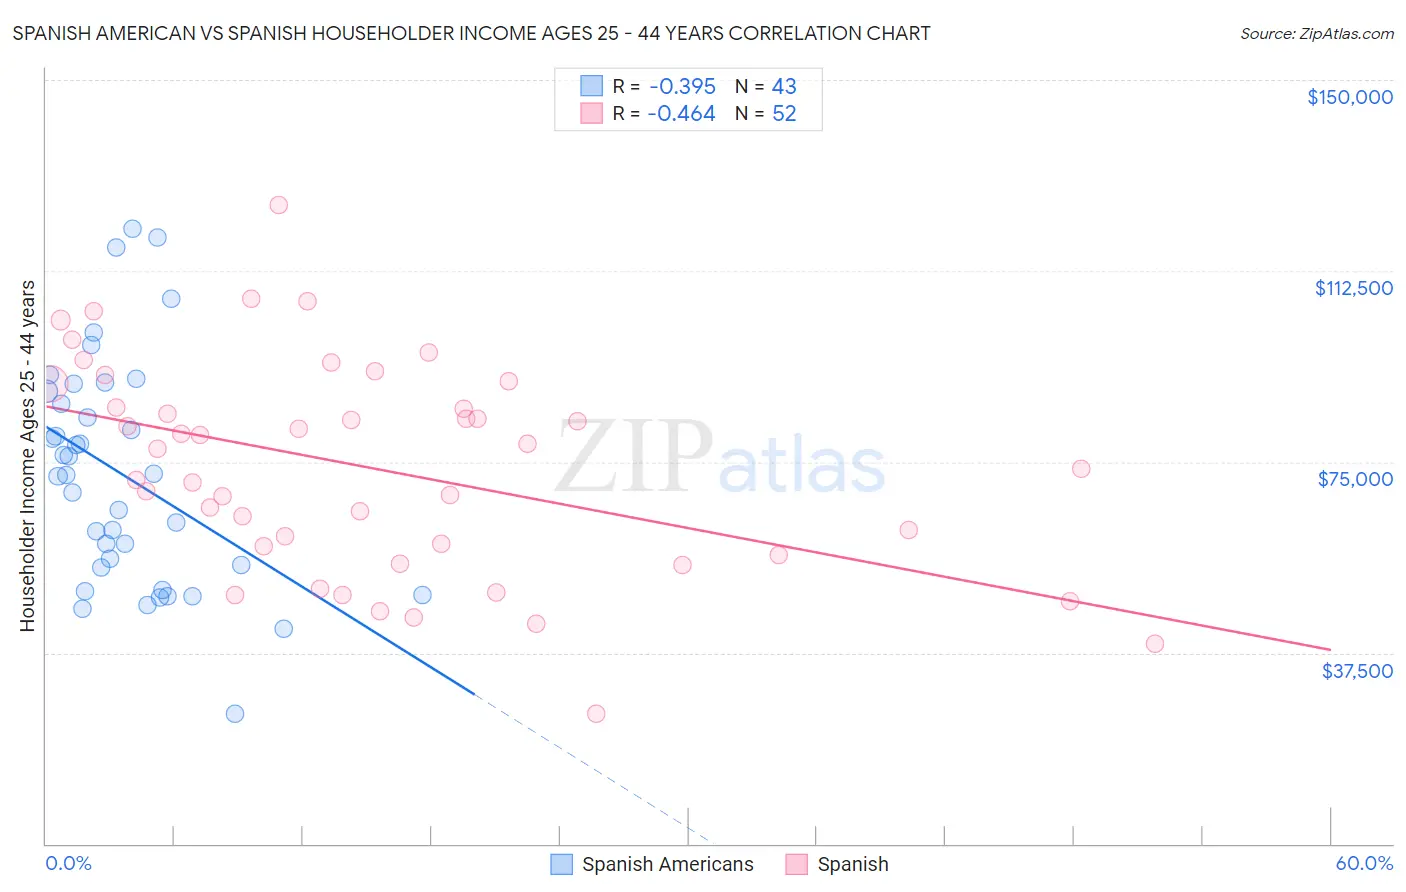 Spanish American vs Spanish Householder Income Ages 25 - 44 years